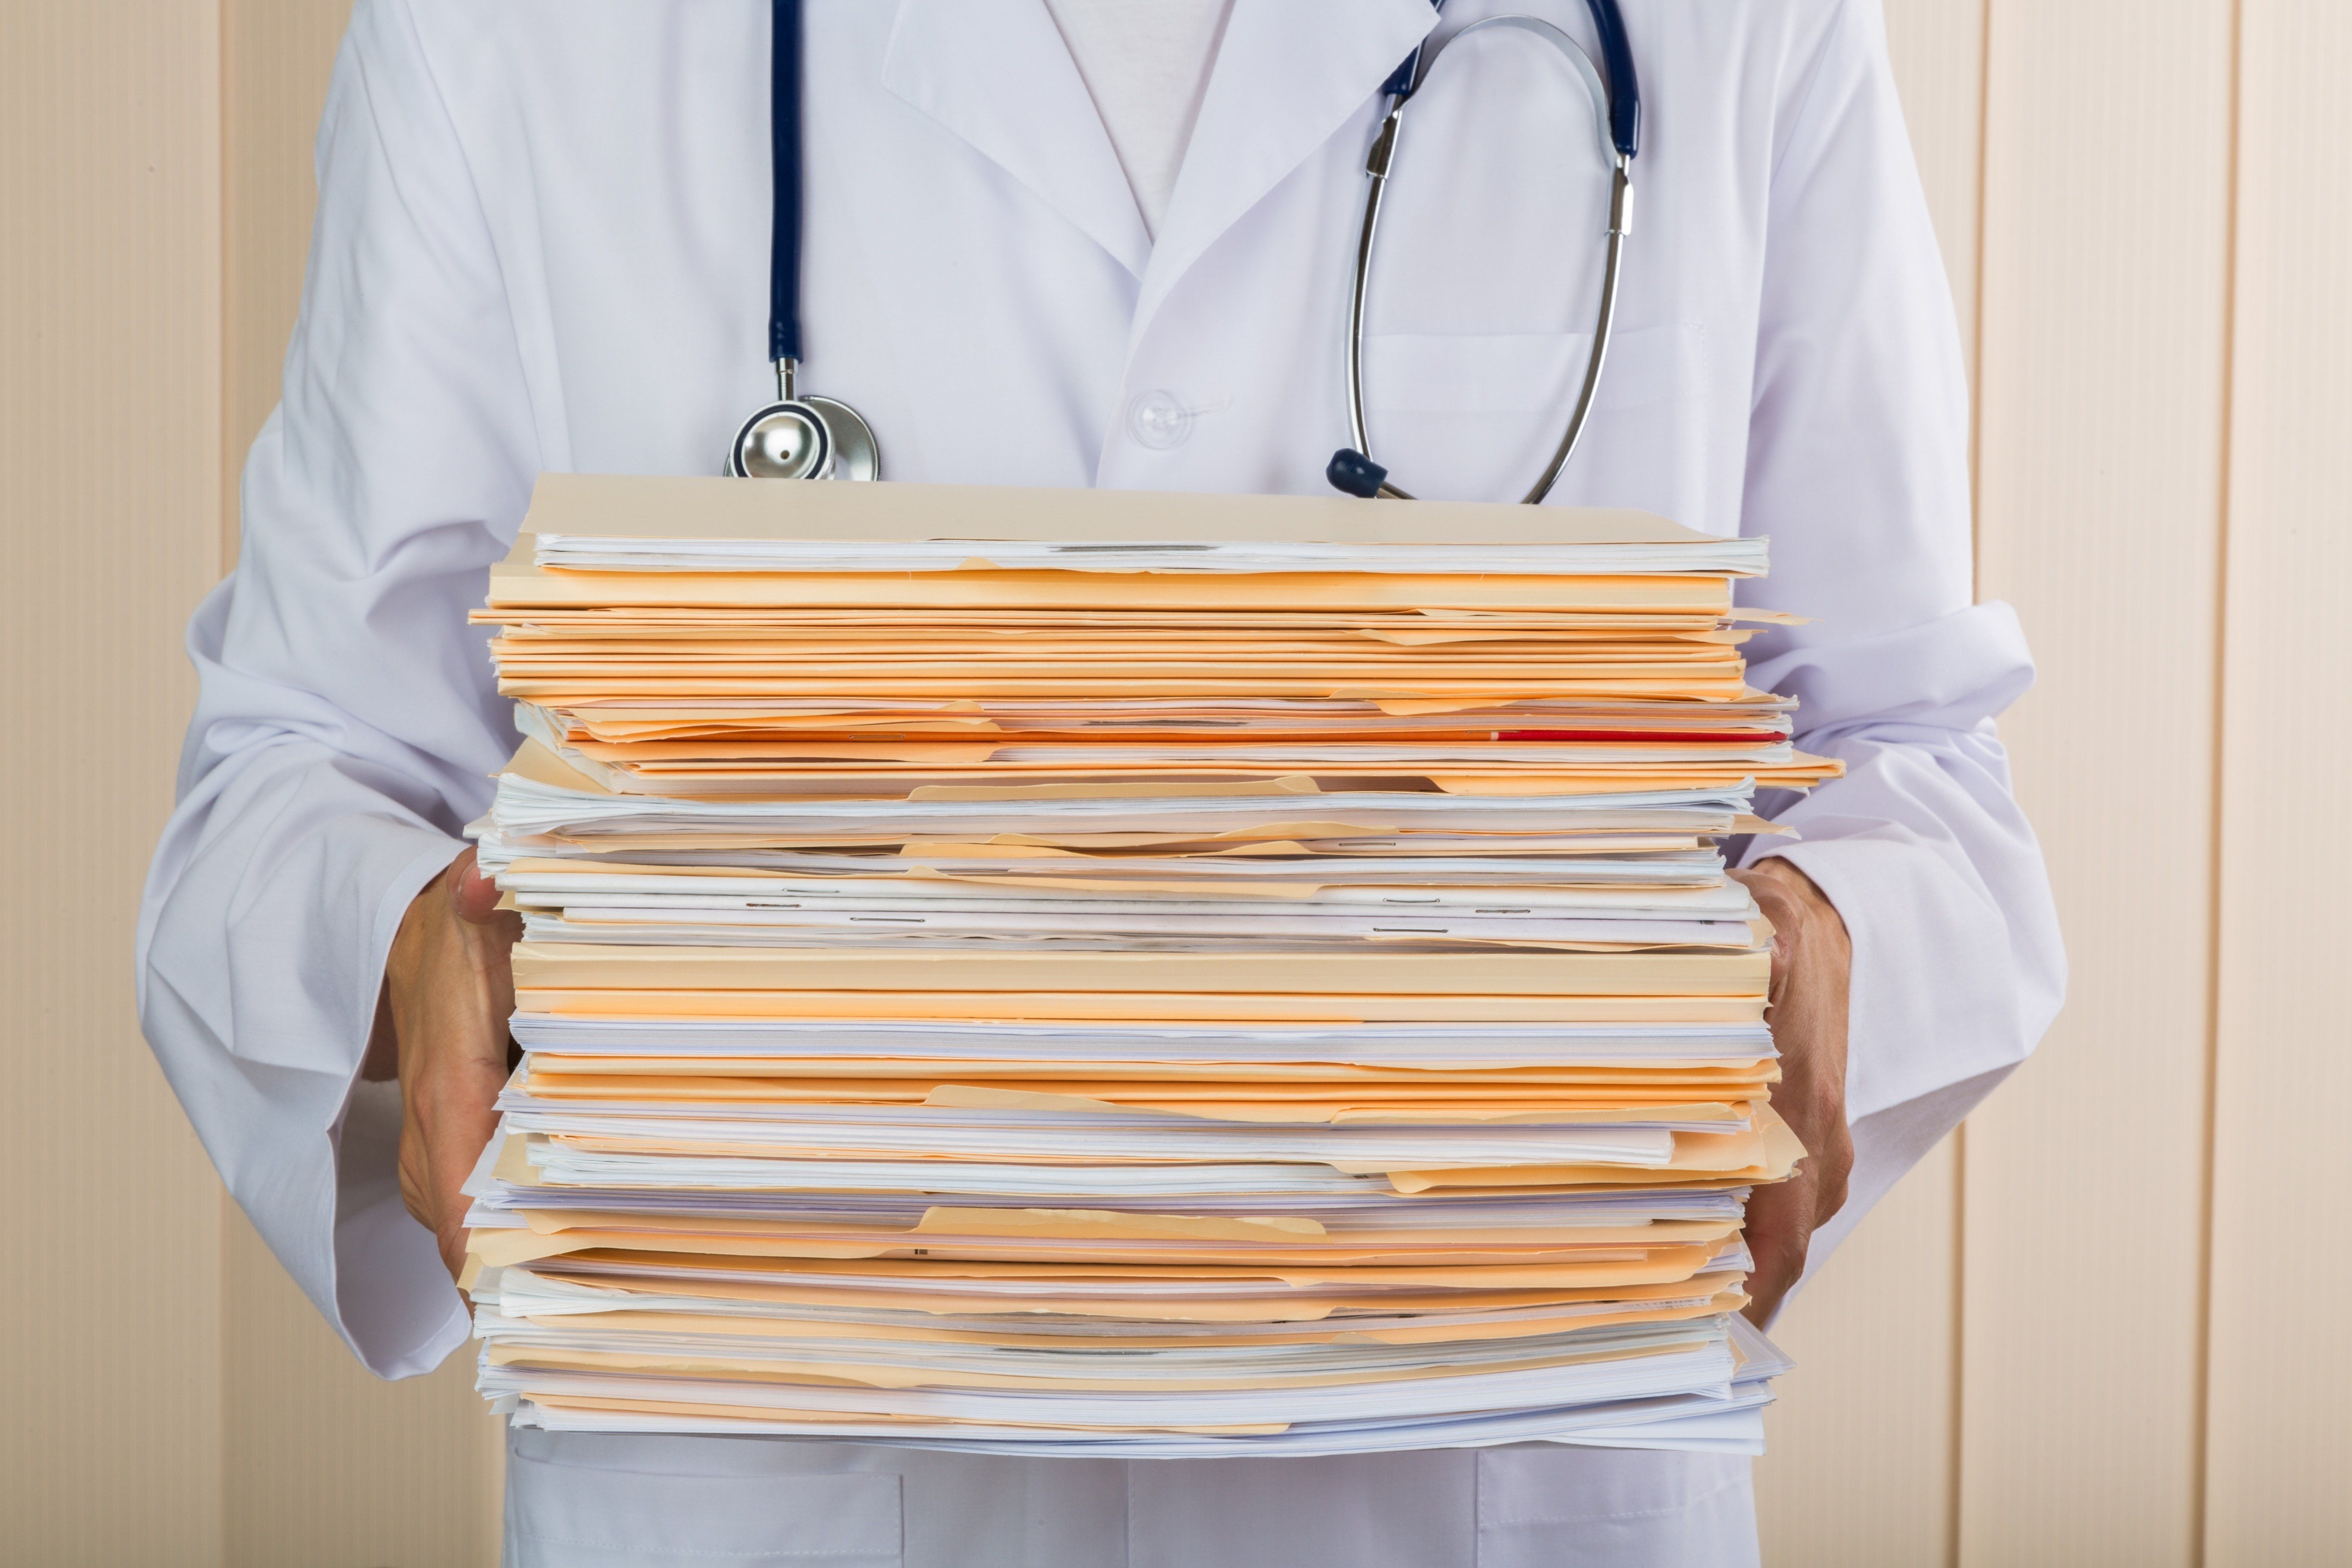 Primary care physicians have 26.7 hours of work per eight-hour shift